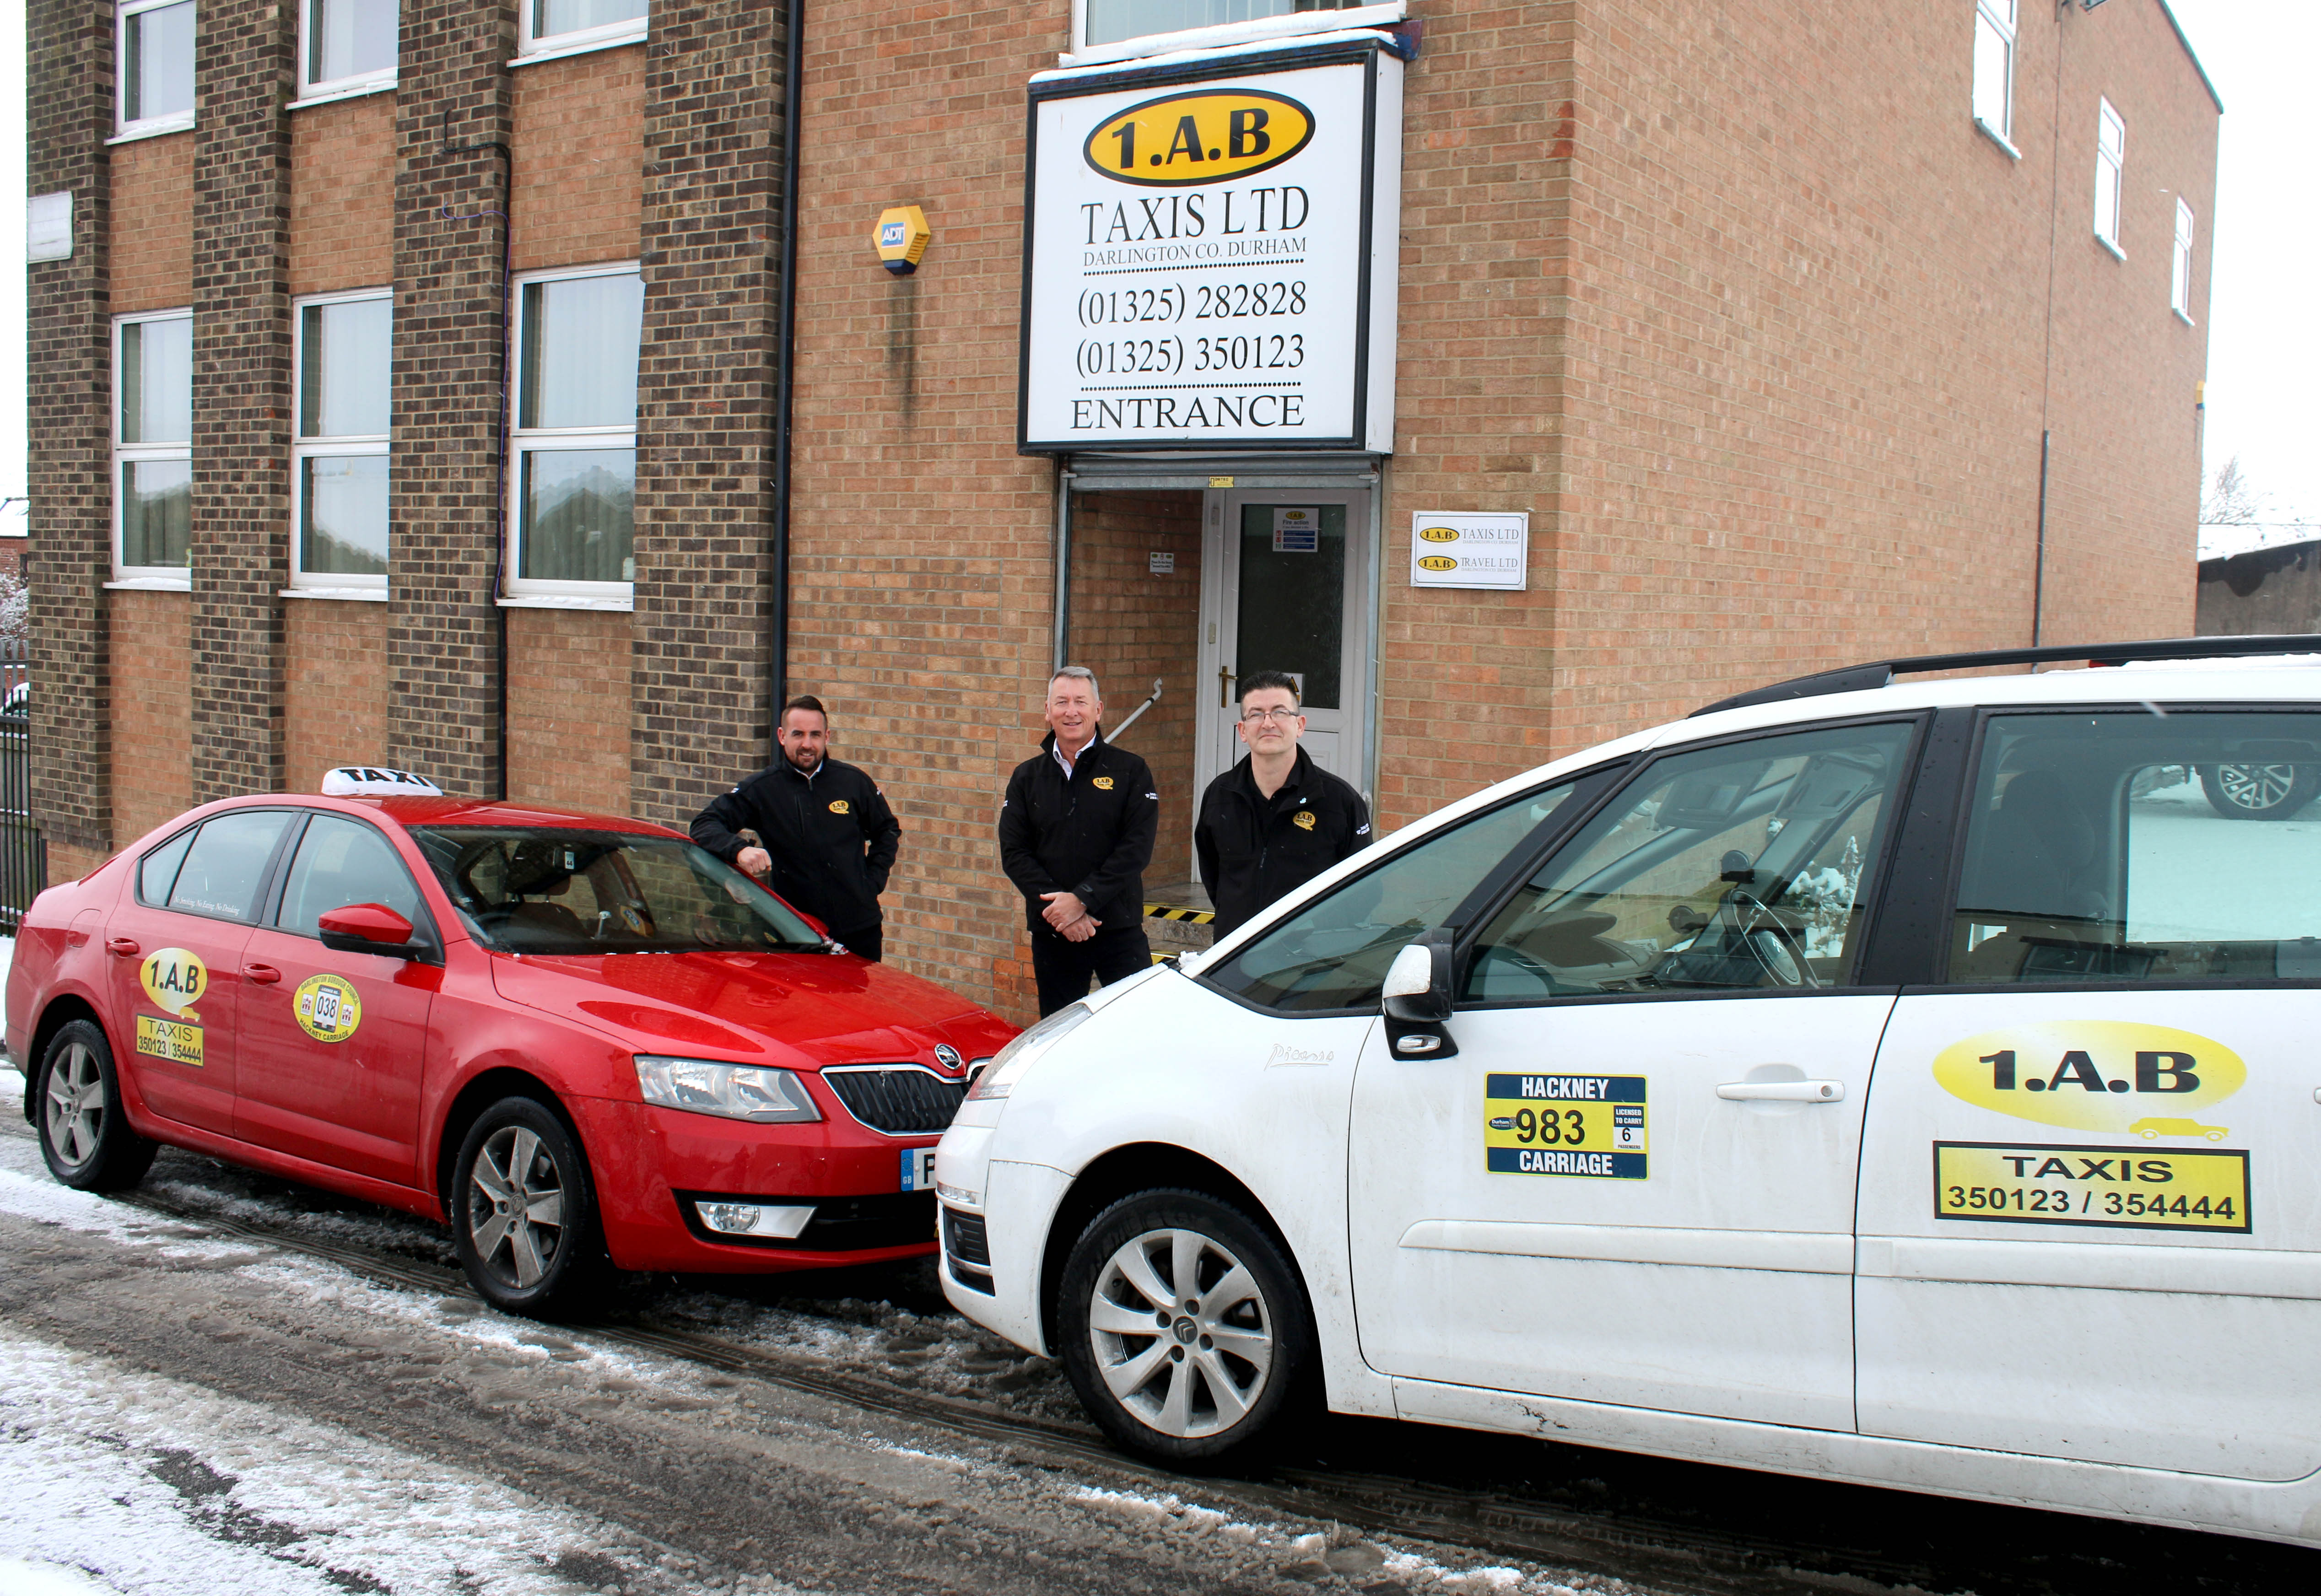 Darlington 1AB Taxi Company Opens in Aycliffe